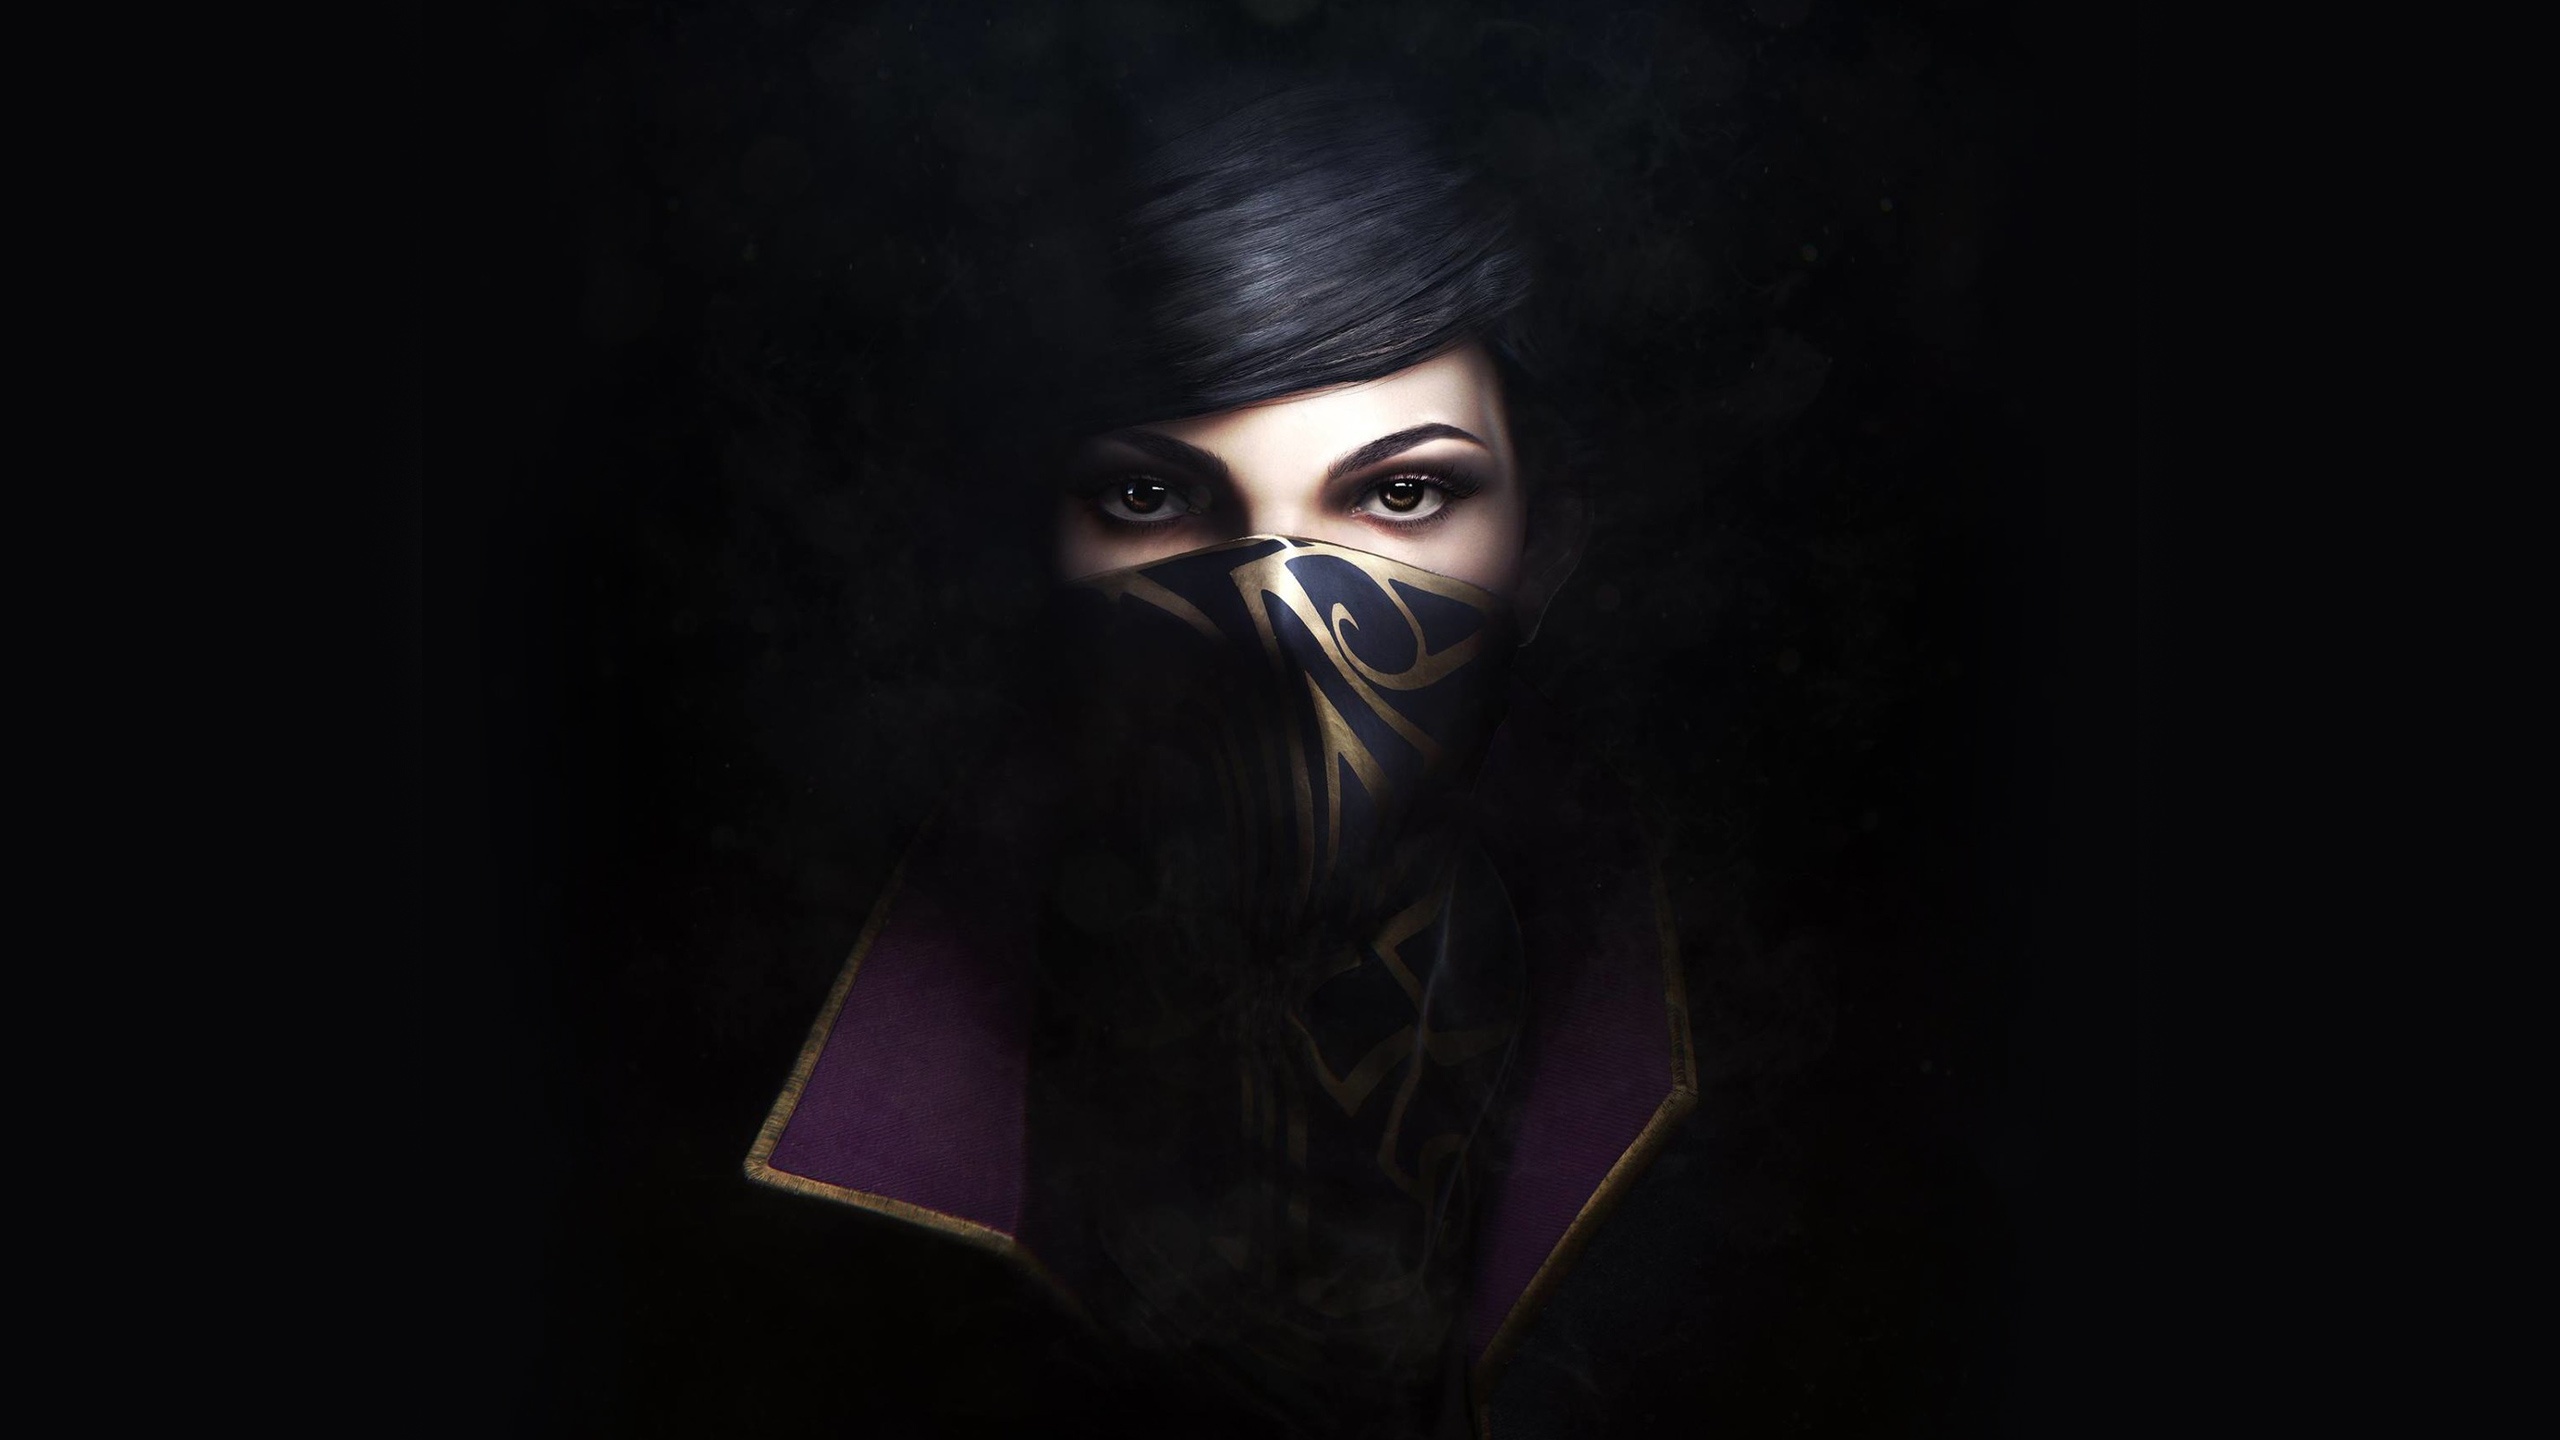 dishonored 2, dishonored, video game, emily kaldwin